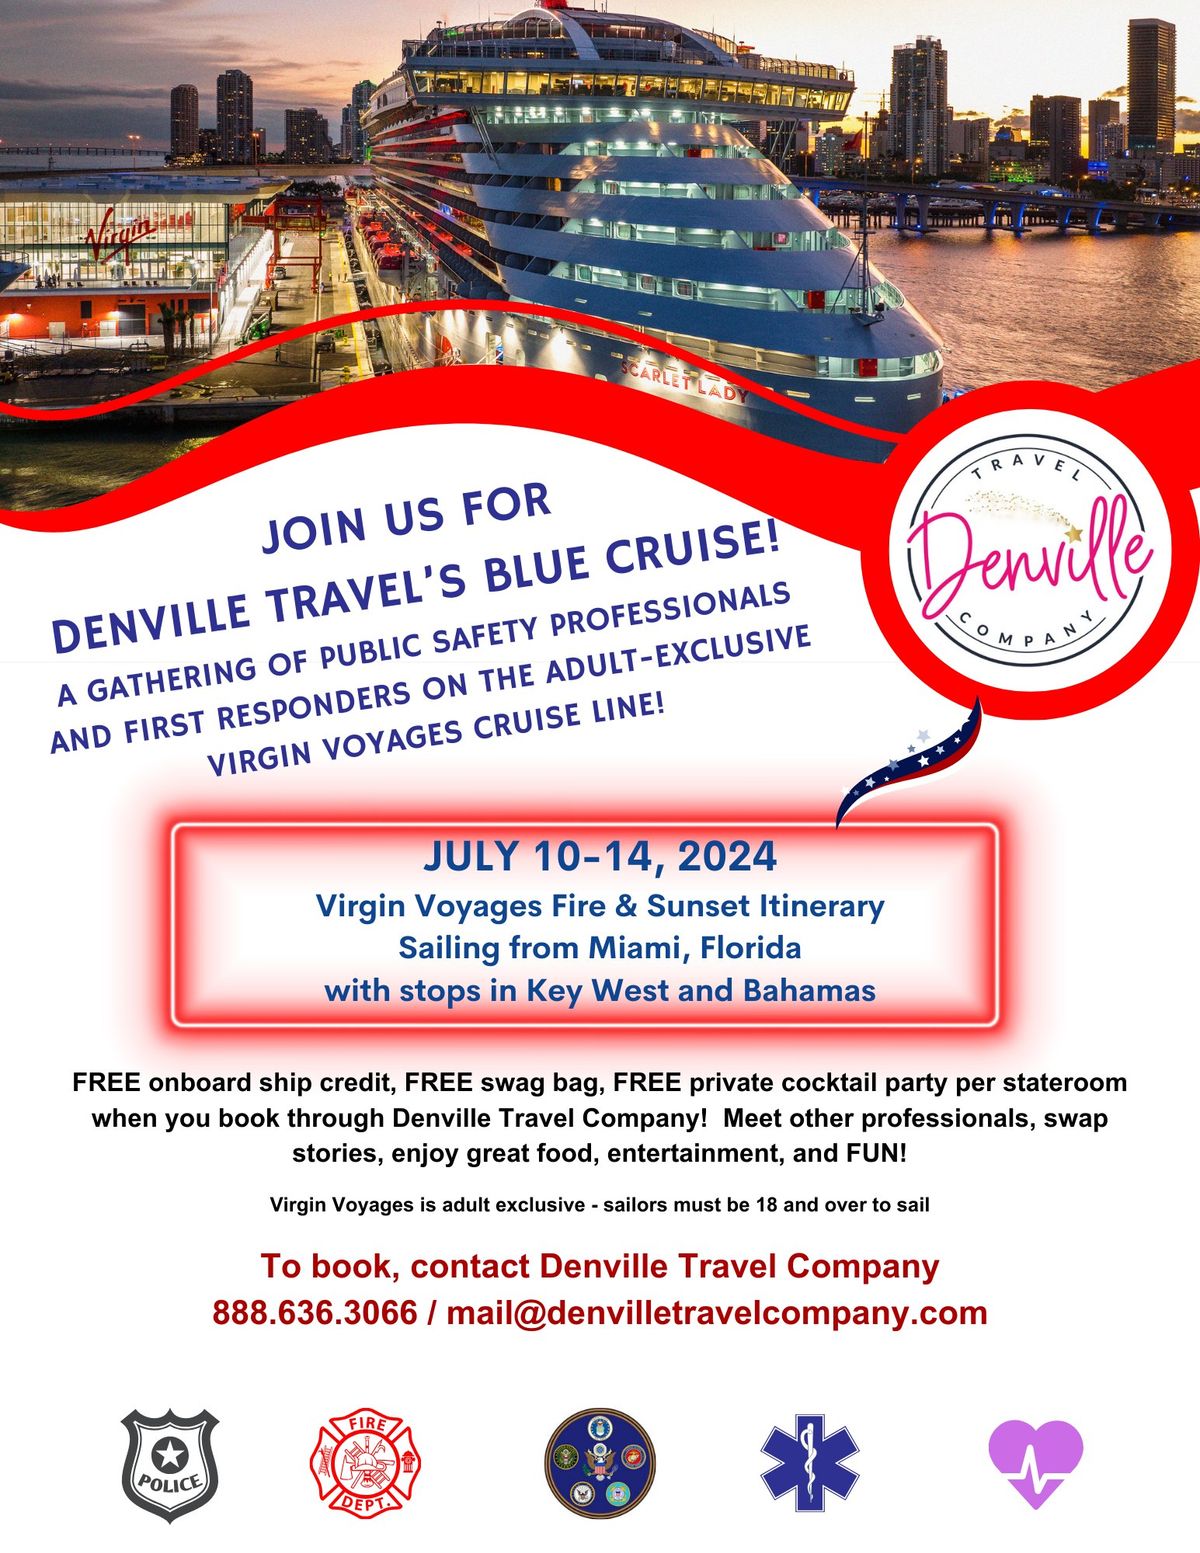 Blue Cruise for Public Safety Professionals on Virgin Voyages!